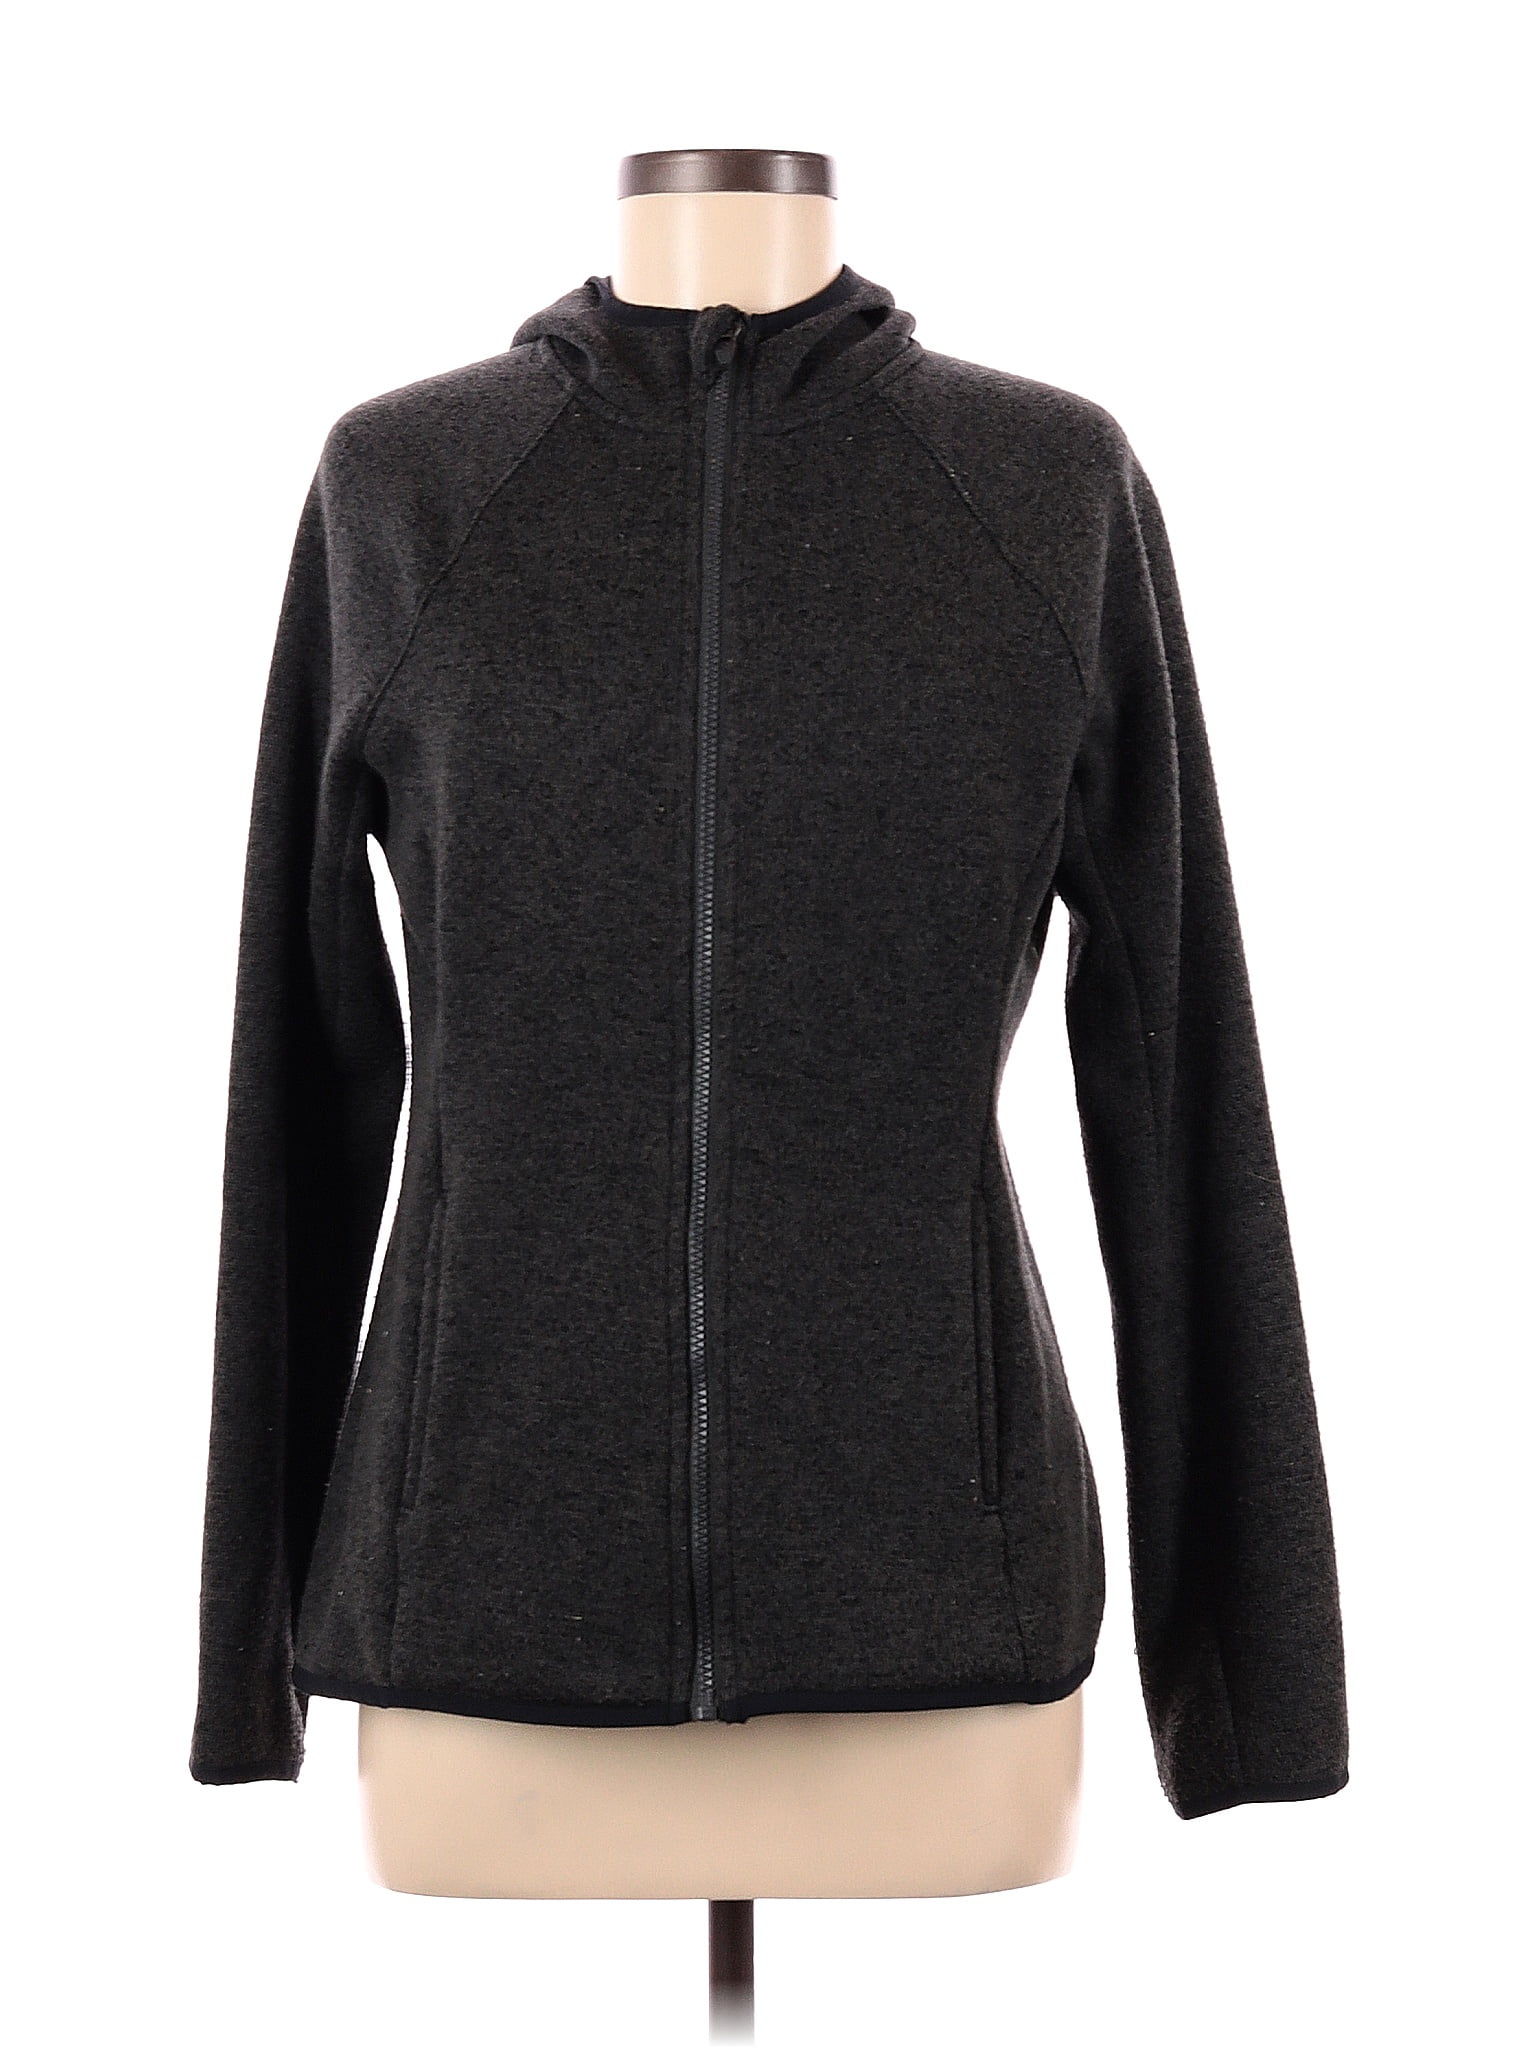 Tek Gear Jacket Gray Size S petite - $10 (66% Off Retail) New With Tags -  From Carley